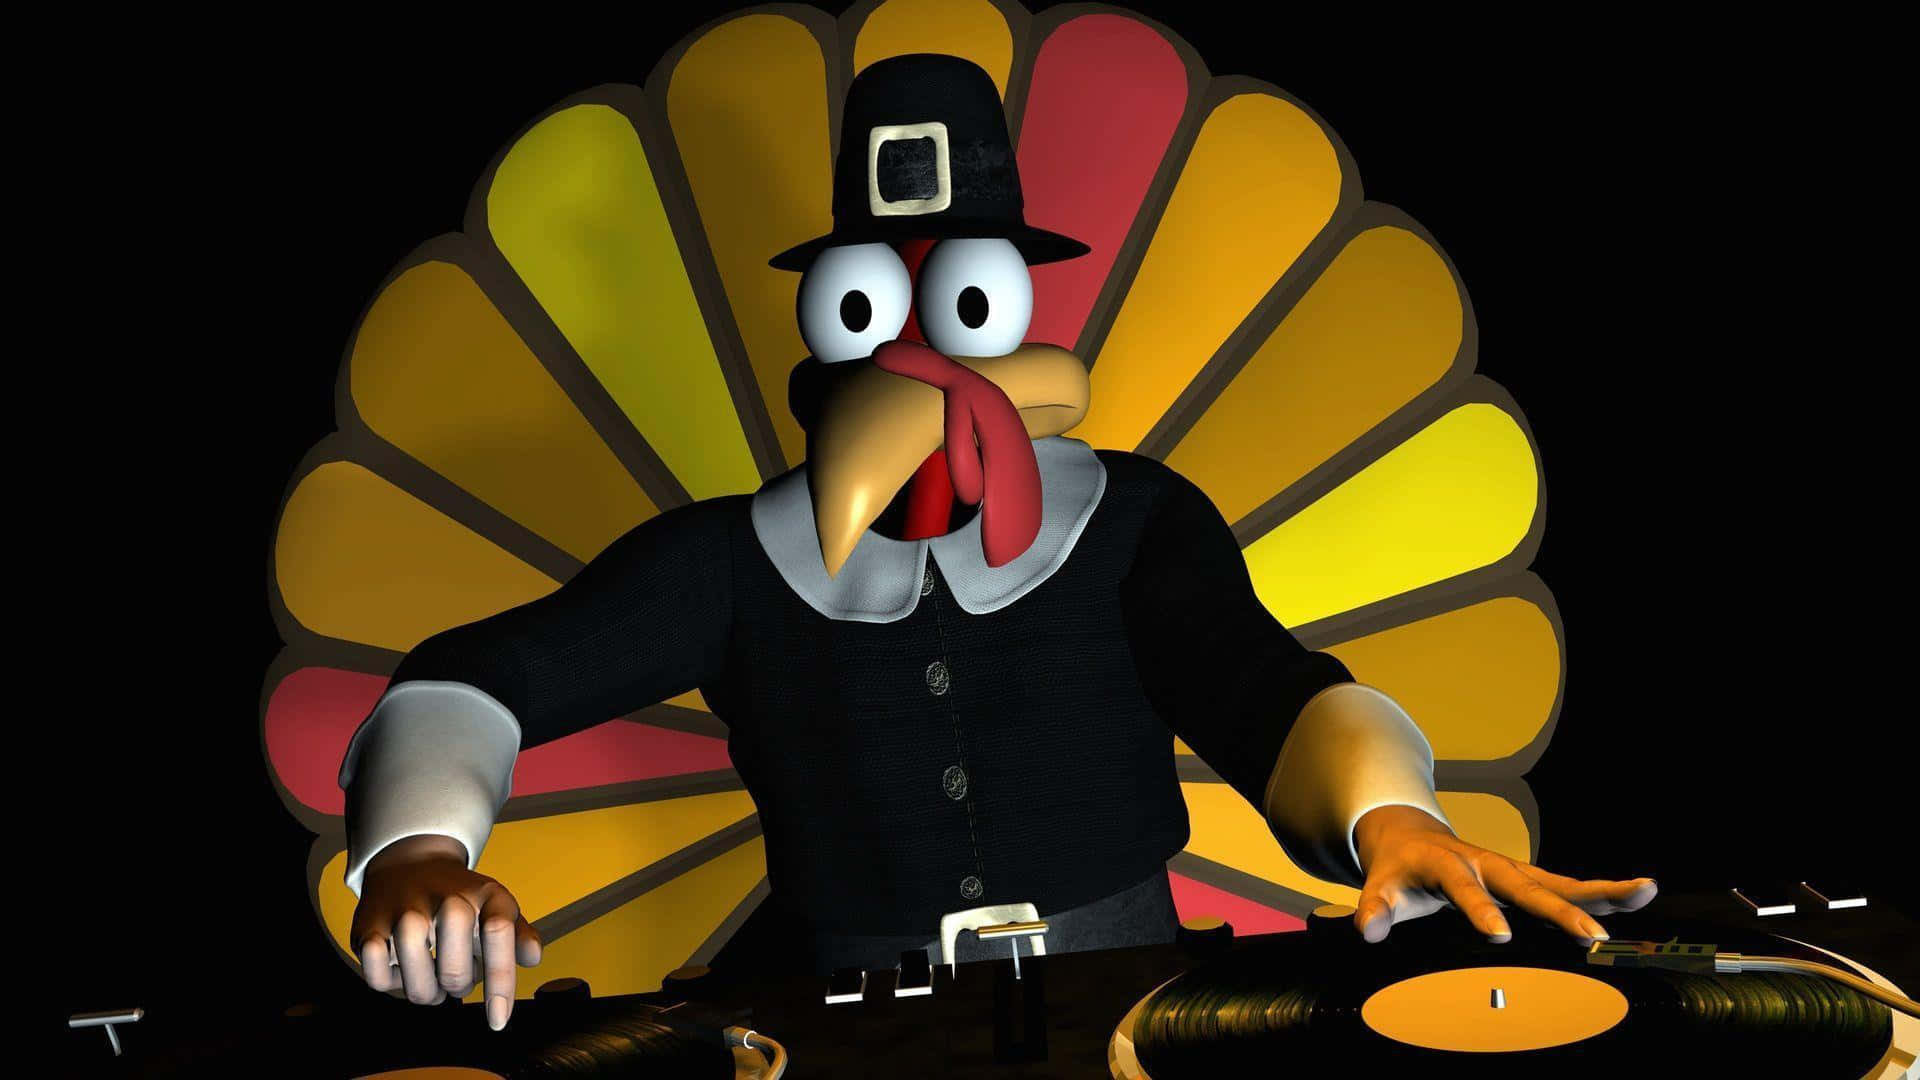 Celebrate Thanksgiving with a humorous twist. Wallpaper